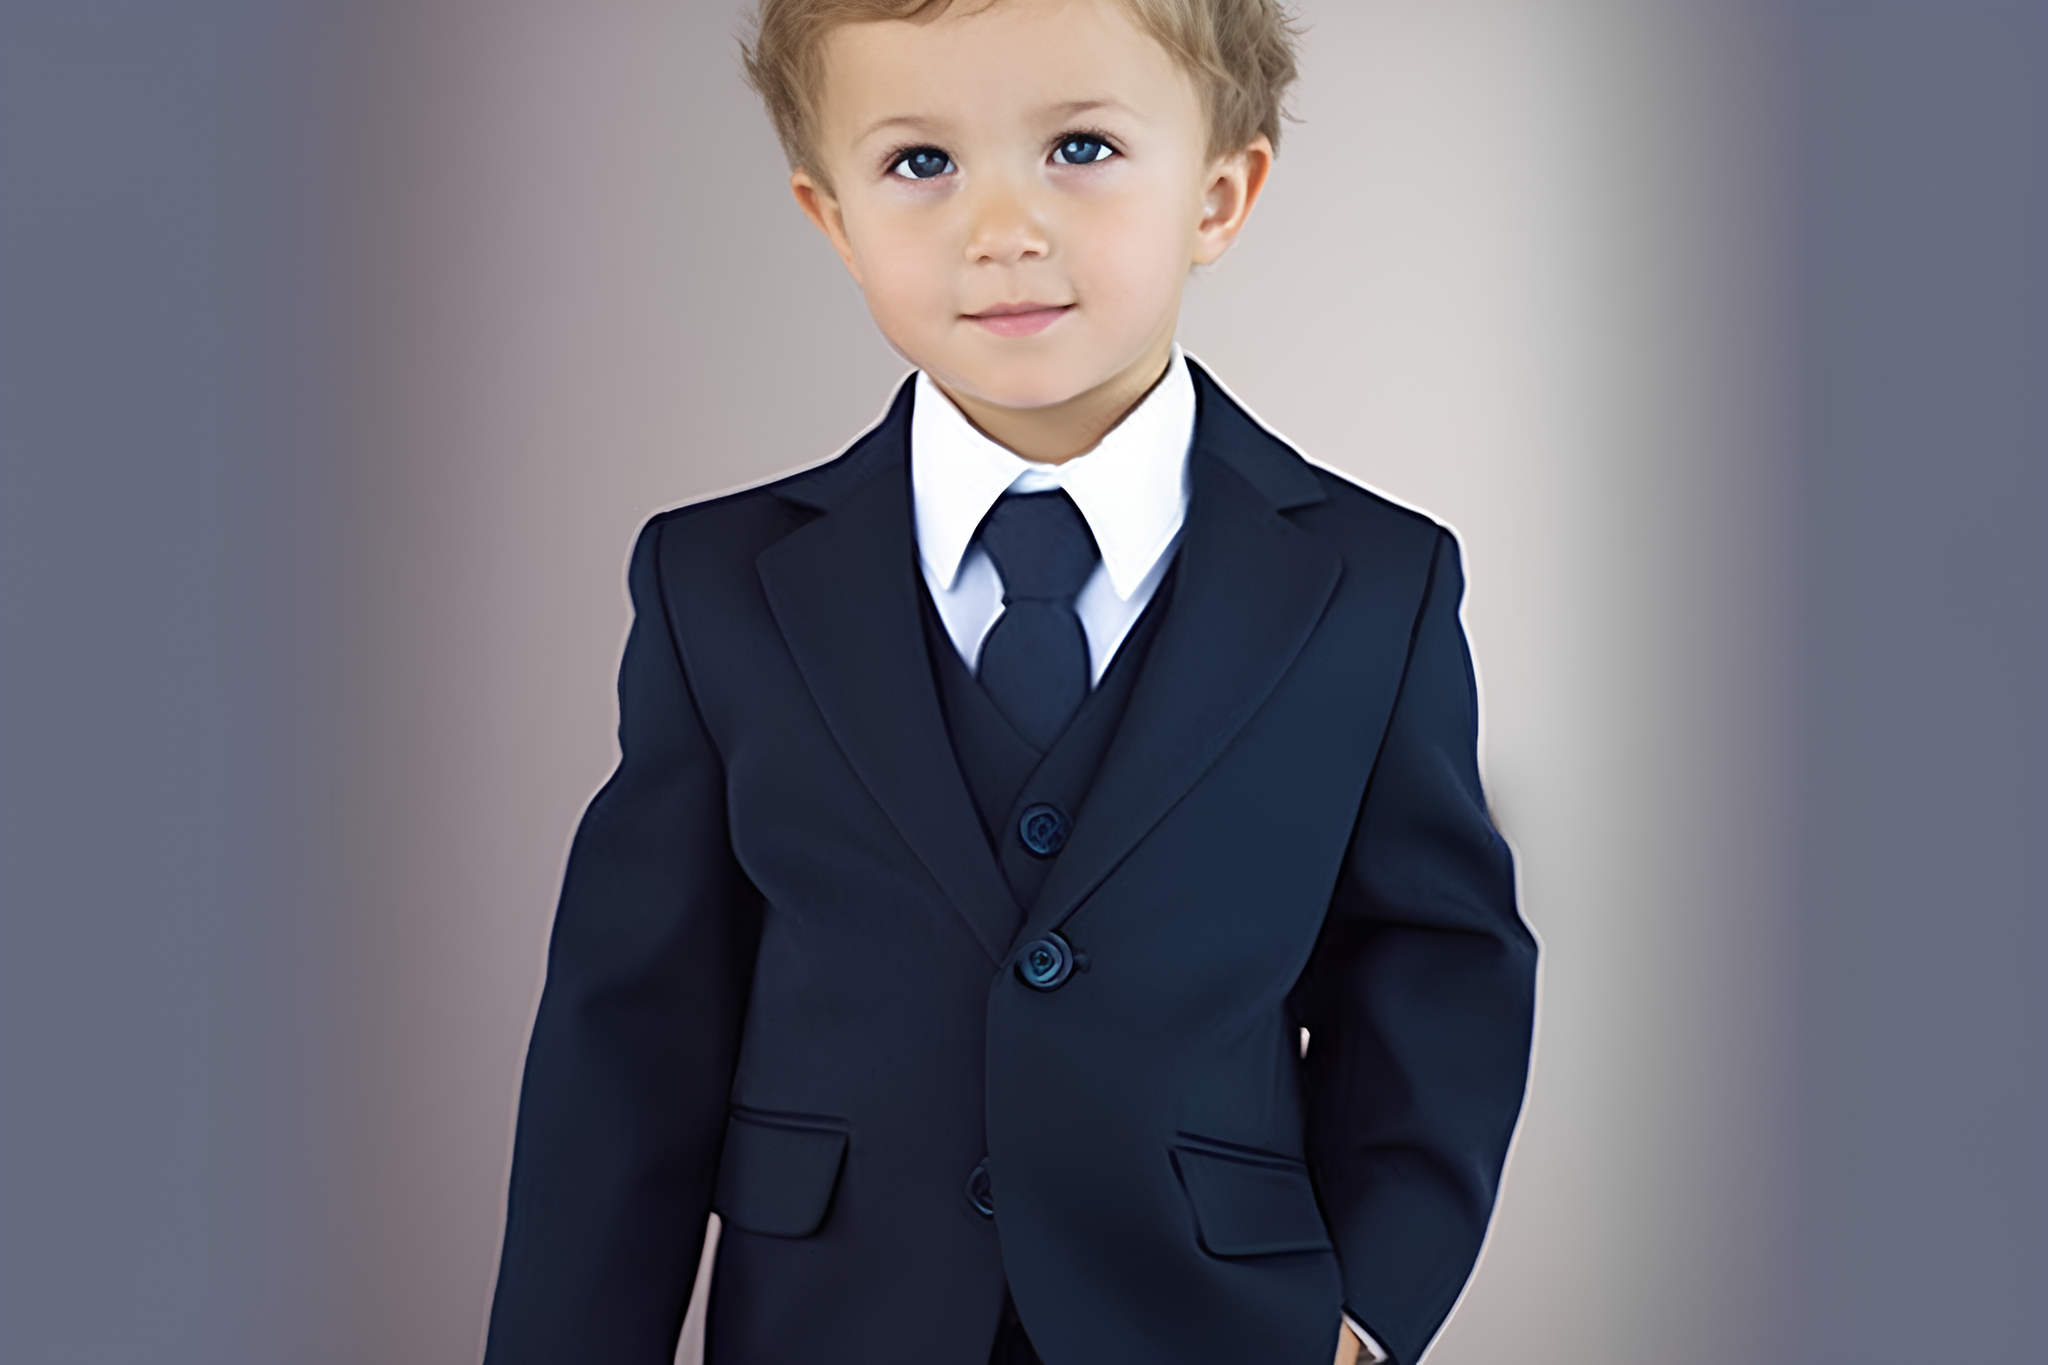 Young charm meets sleek design in the Classic Slim navy suit for boys.